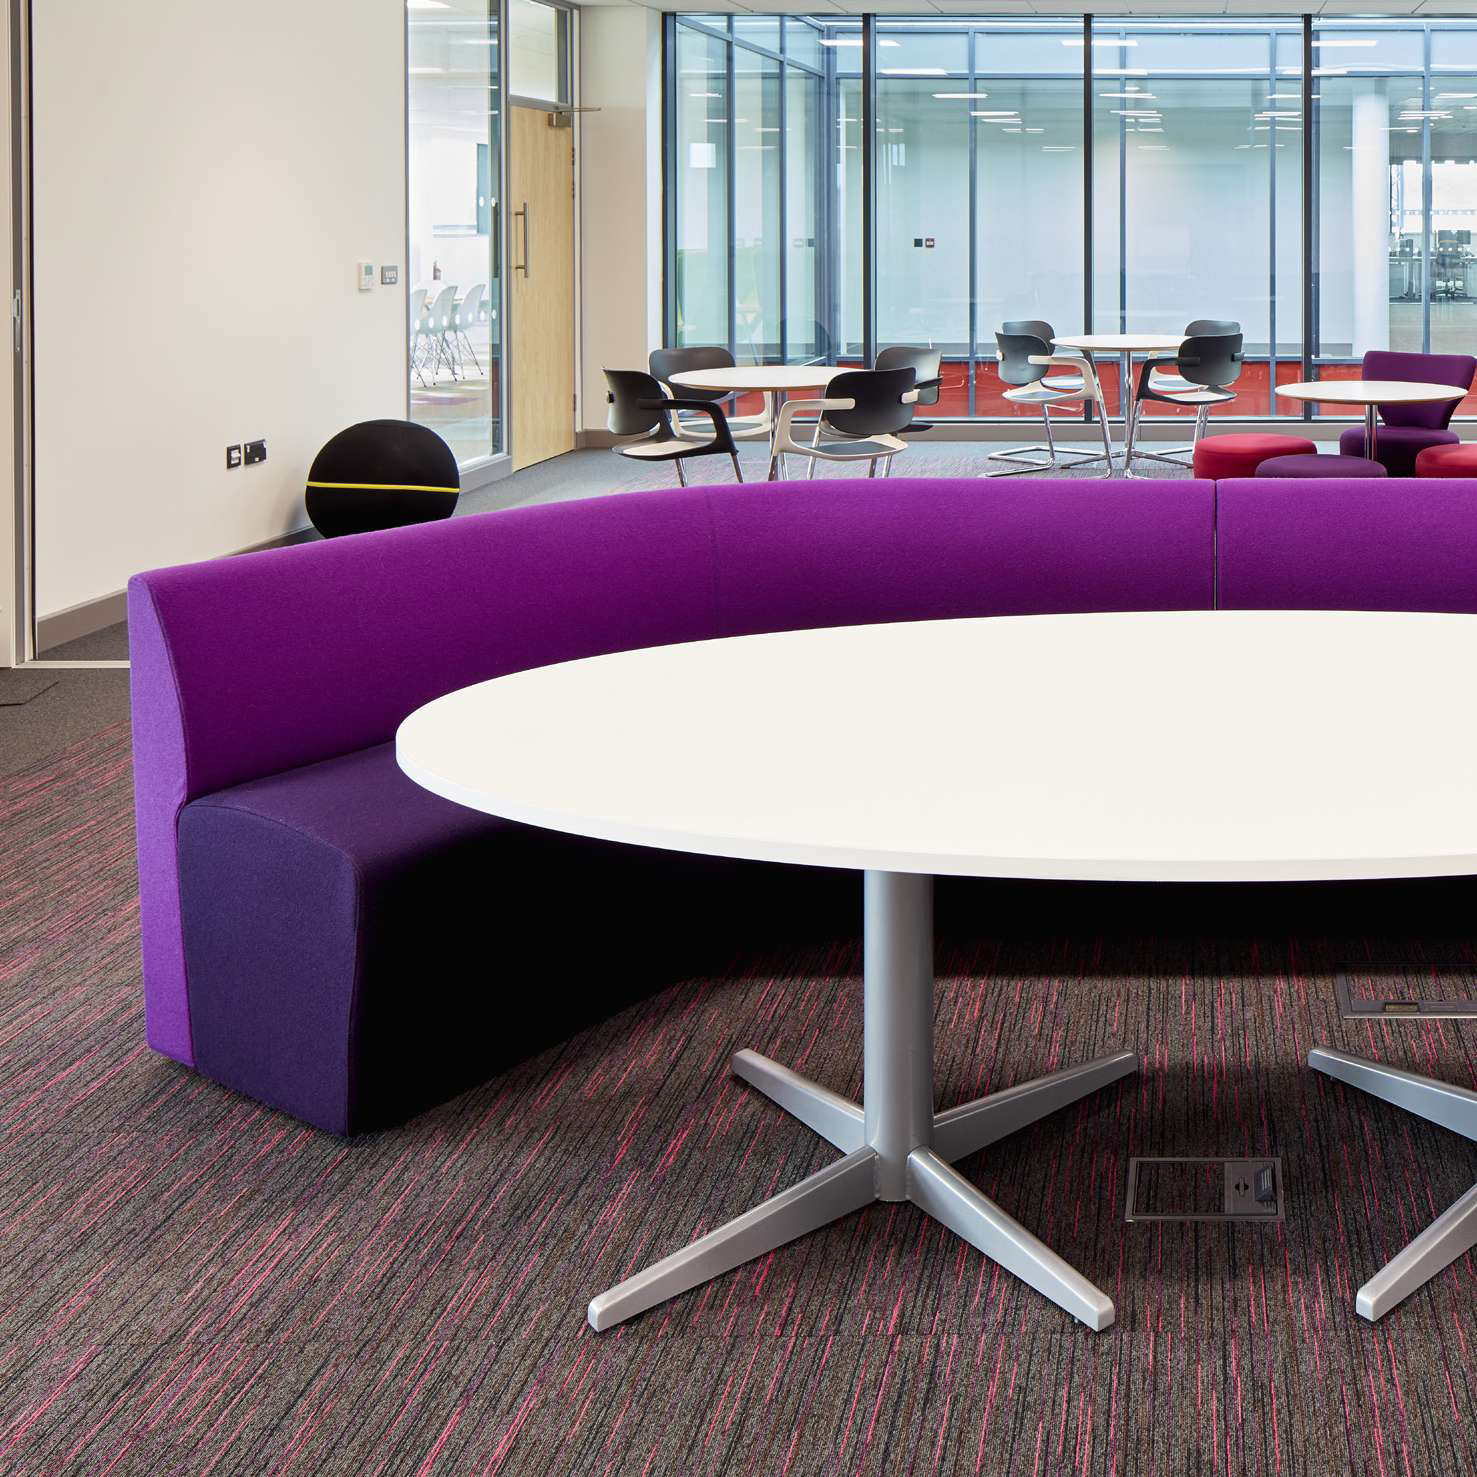 Paragon Strobe used in large seating area in office space.